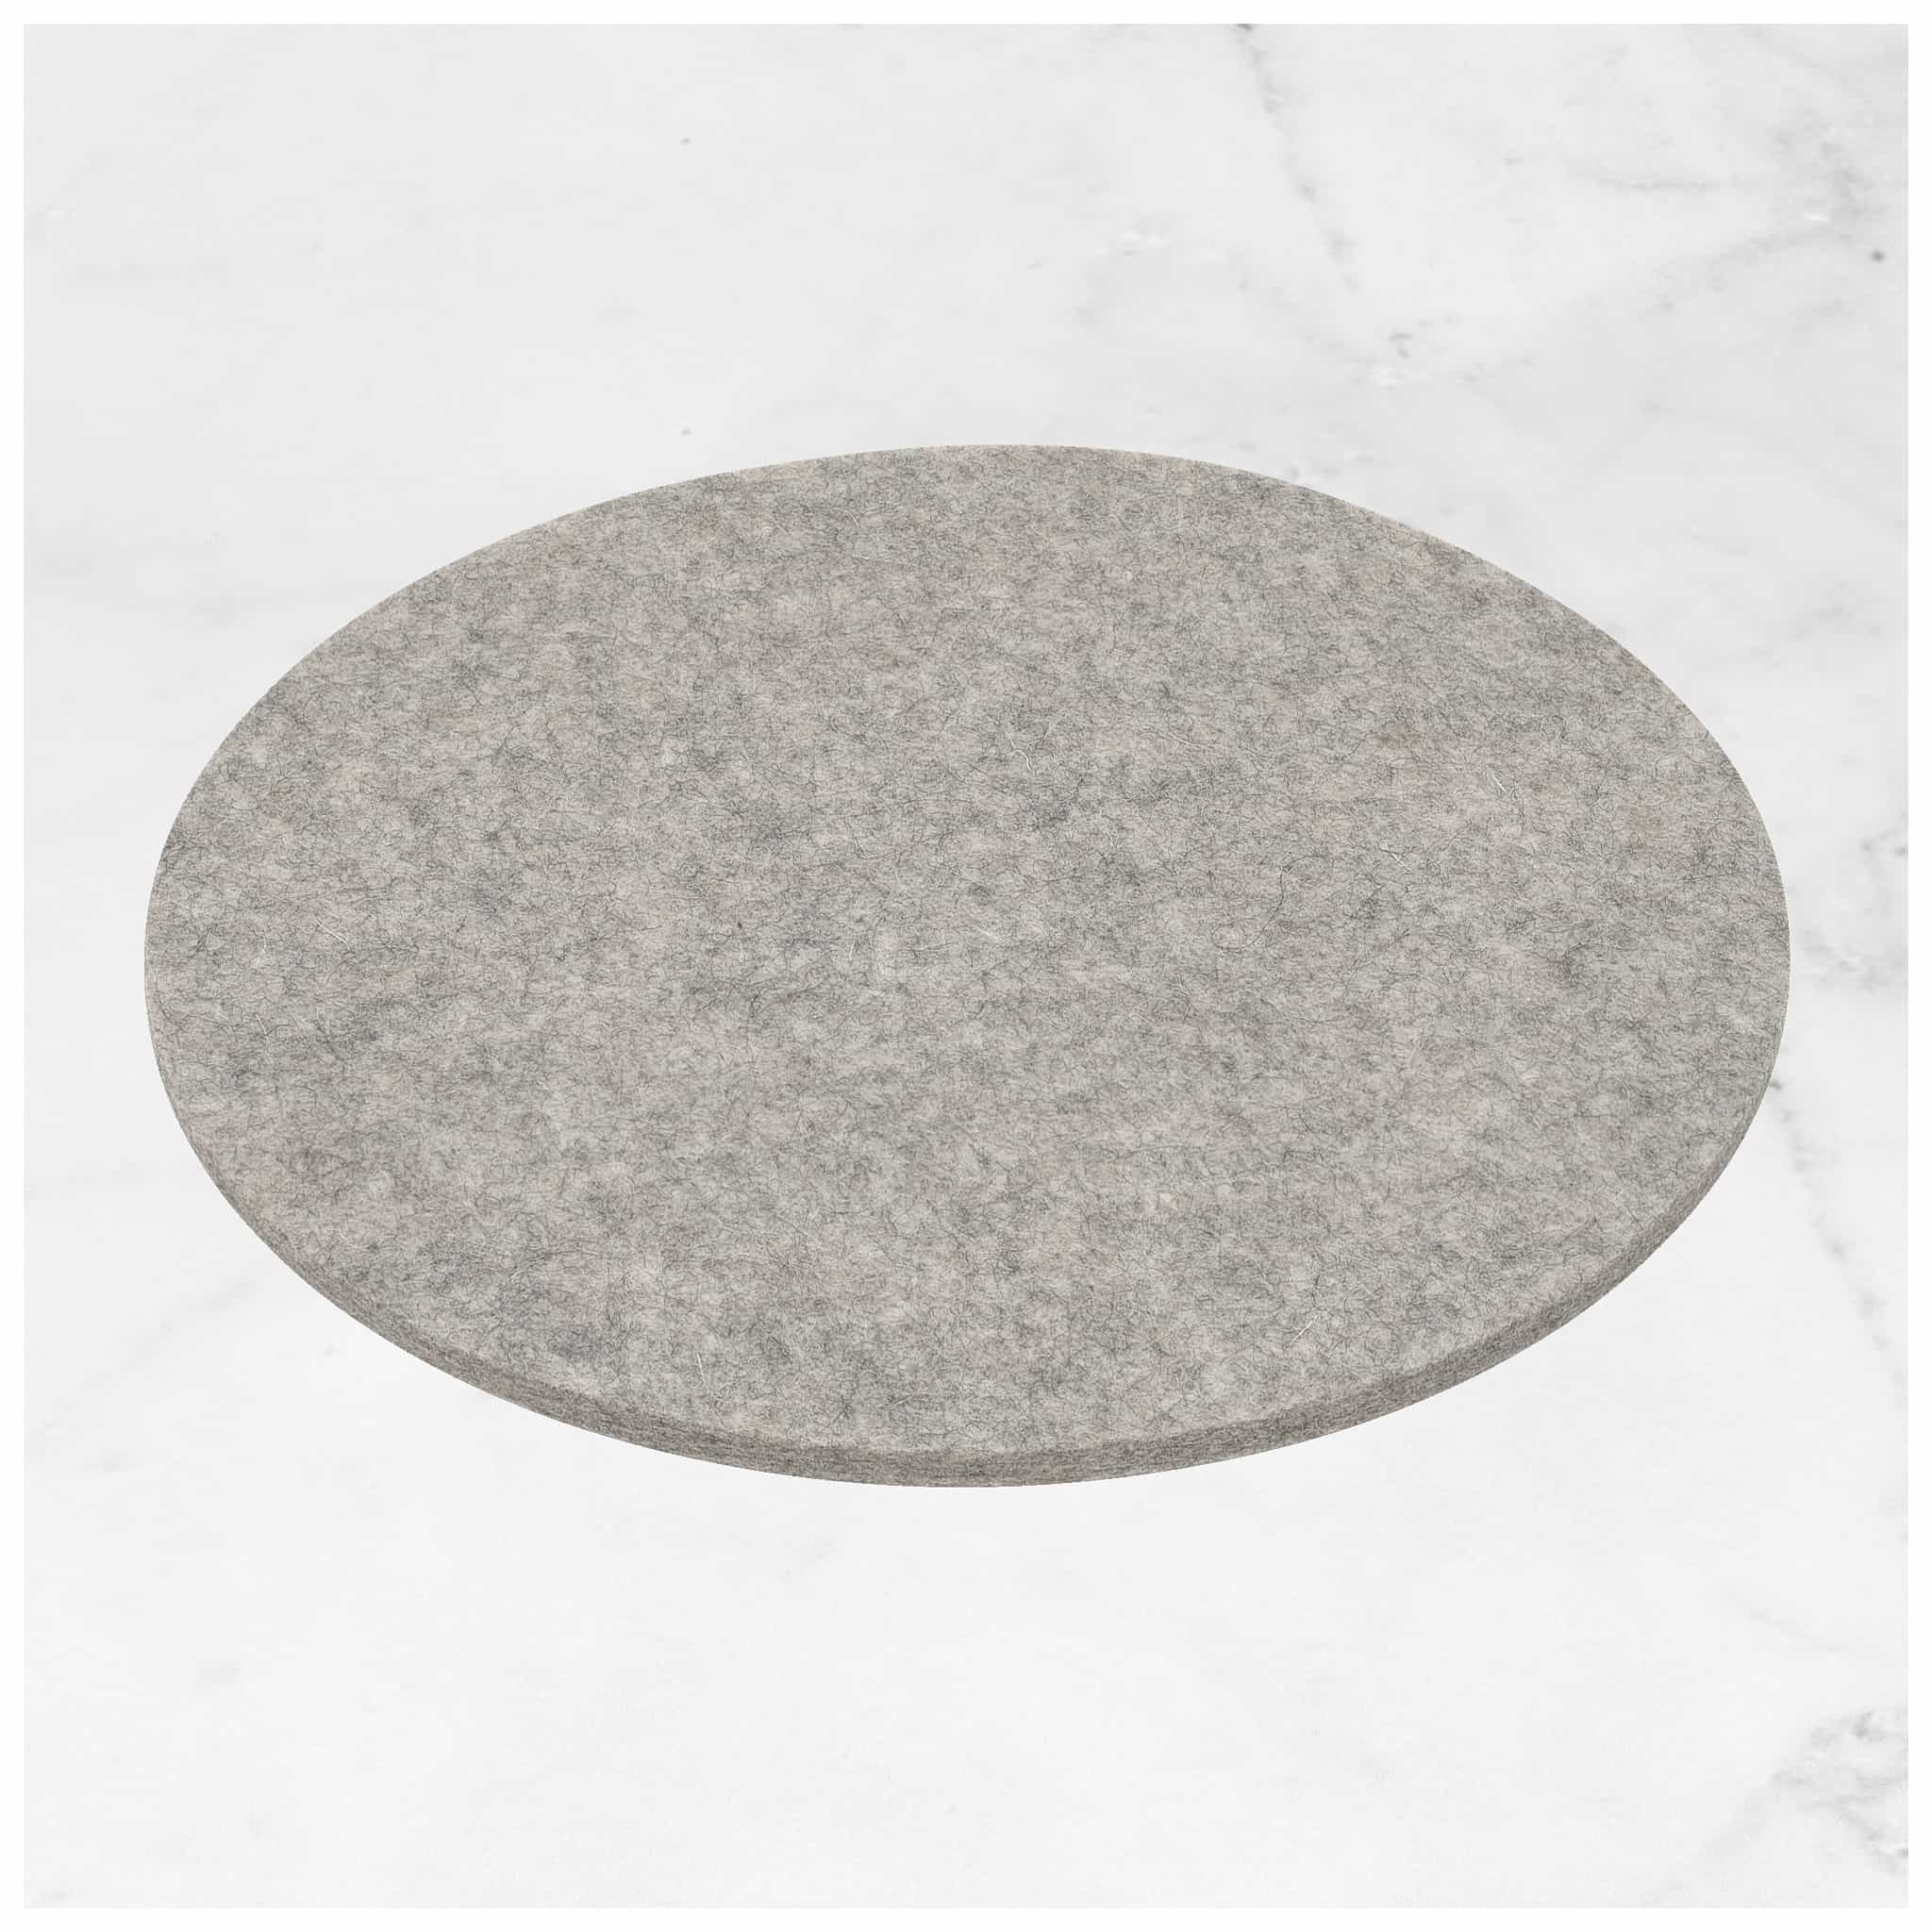 Round Felt Trivet 20cm in Light-Grey by Hey-Sign 300152007 on Marble